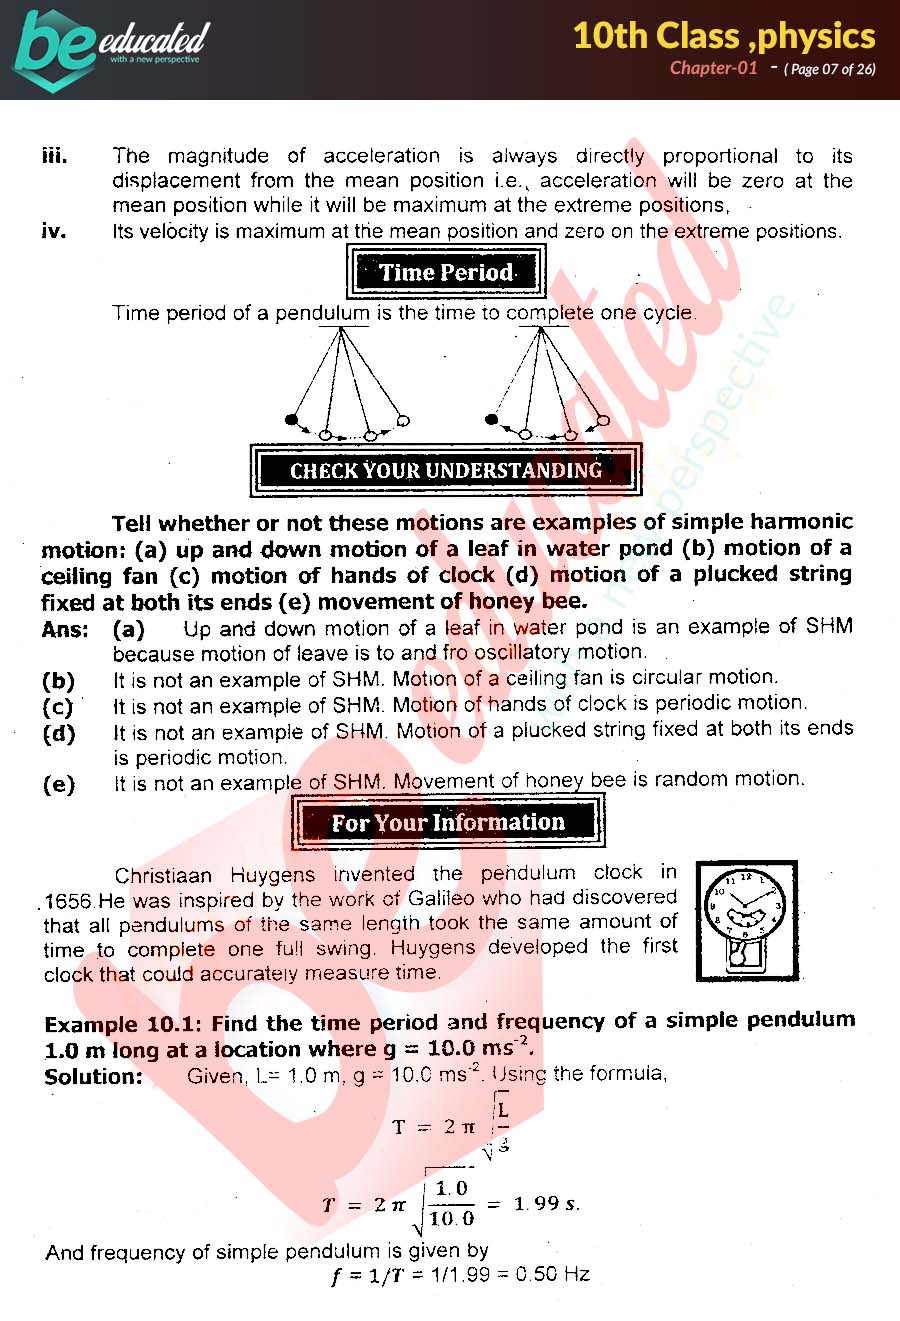 Chapter 1 Physics 10th Class Notes Matric Part 2 Notes Ssch 636313140517929643  